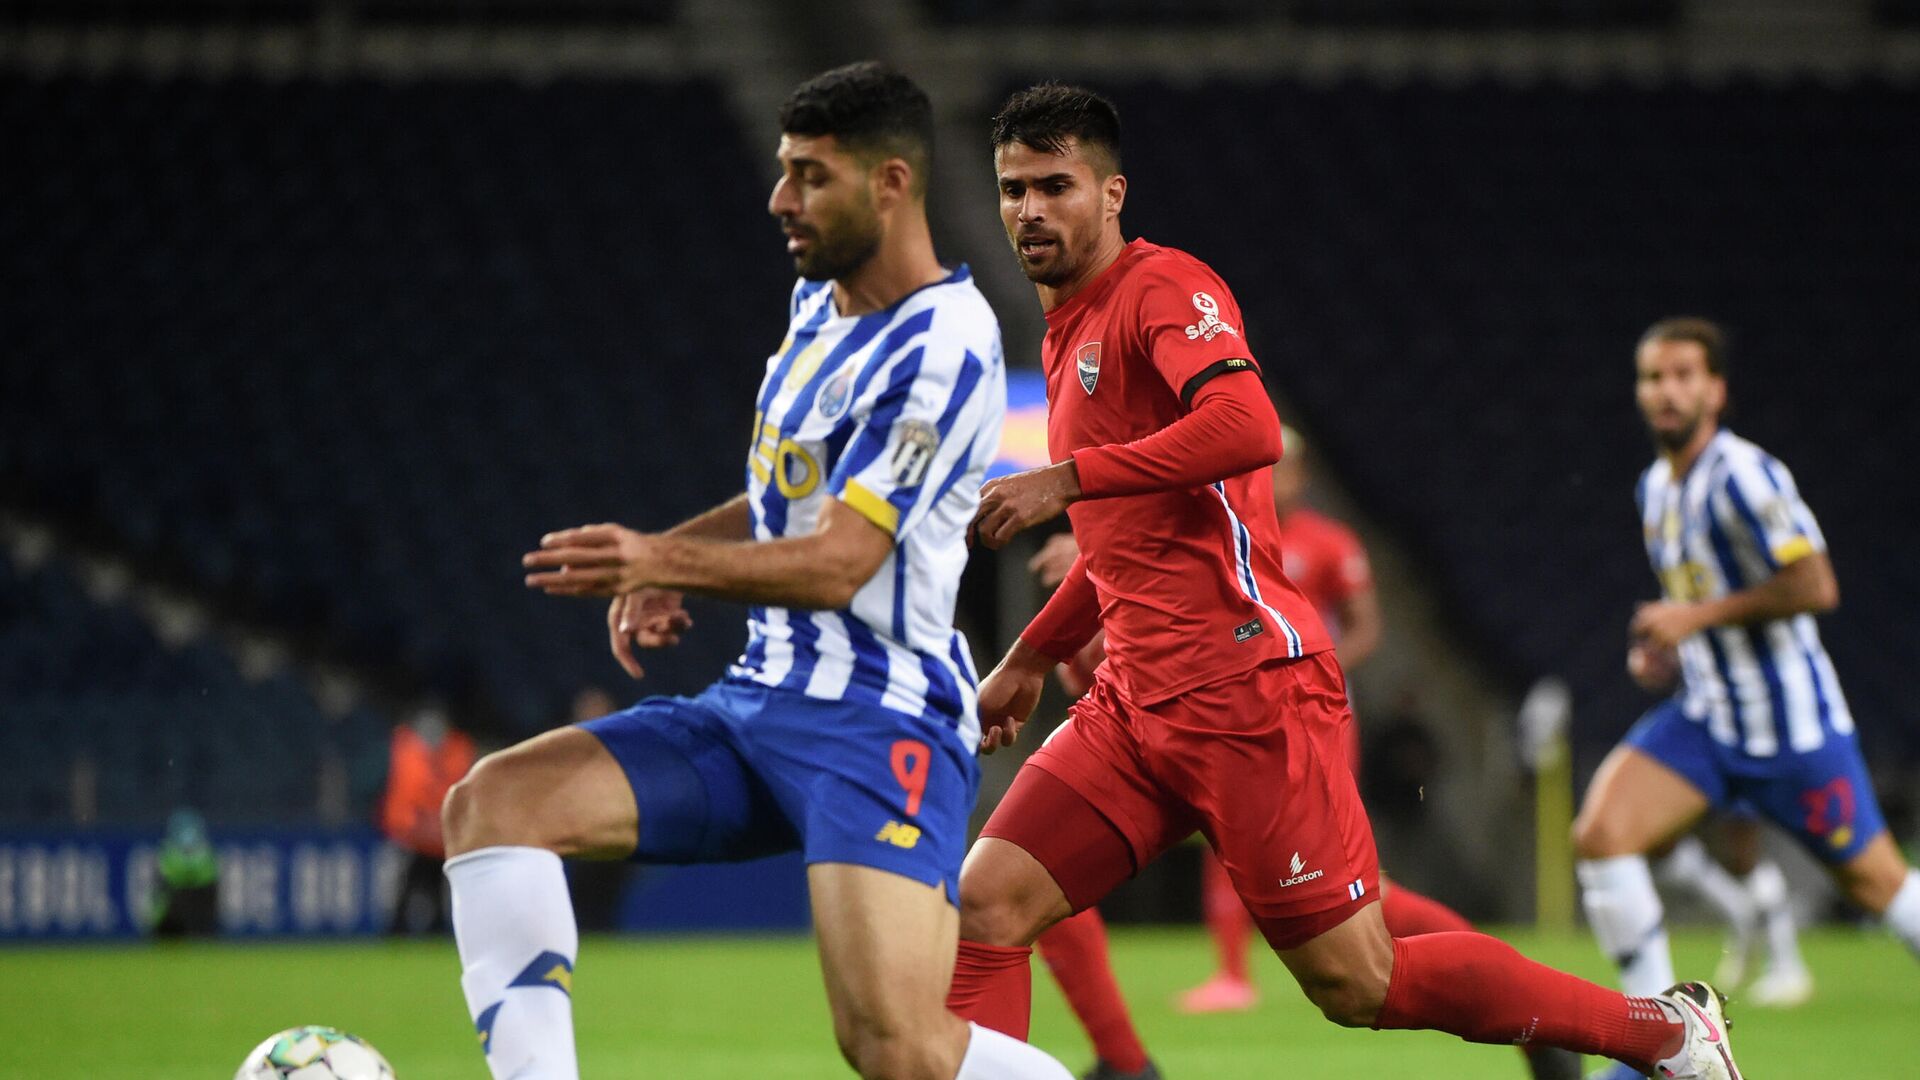 FC Porto's Iranian forward Mehdi Taremi (L) vies with Gil Vicente's Brazilian defender Rodrigao during the Portuguese League football match between Porto and Gil Vicente at the Dragao stadium in Porto on October 24, 2020. (Photo by MIGUEL RIOPA / AFP) - РИА Новости, 1920, 25.10.2020